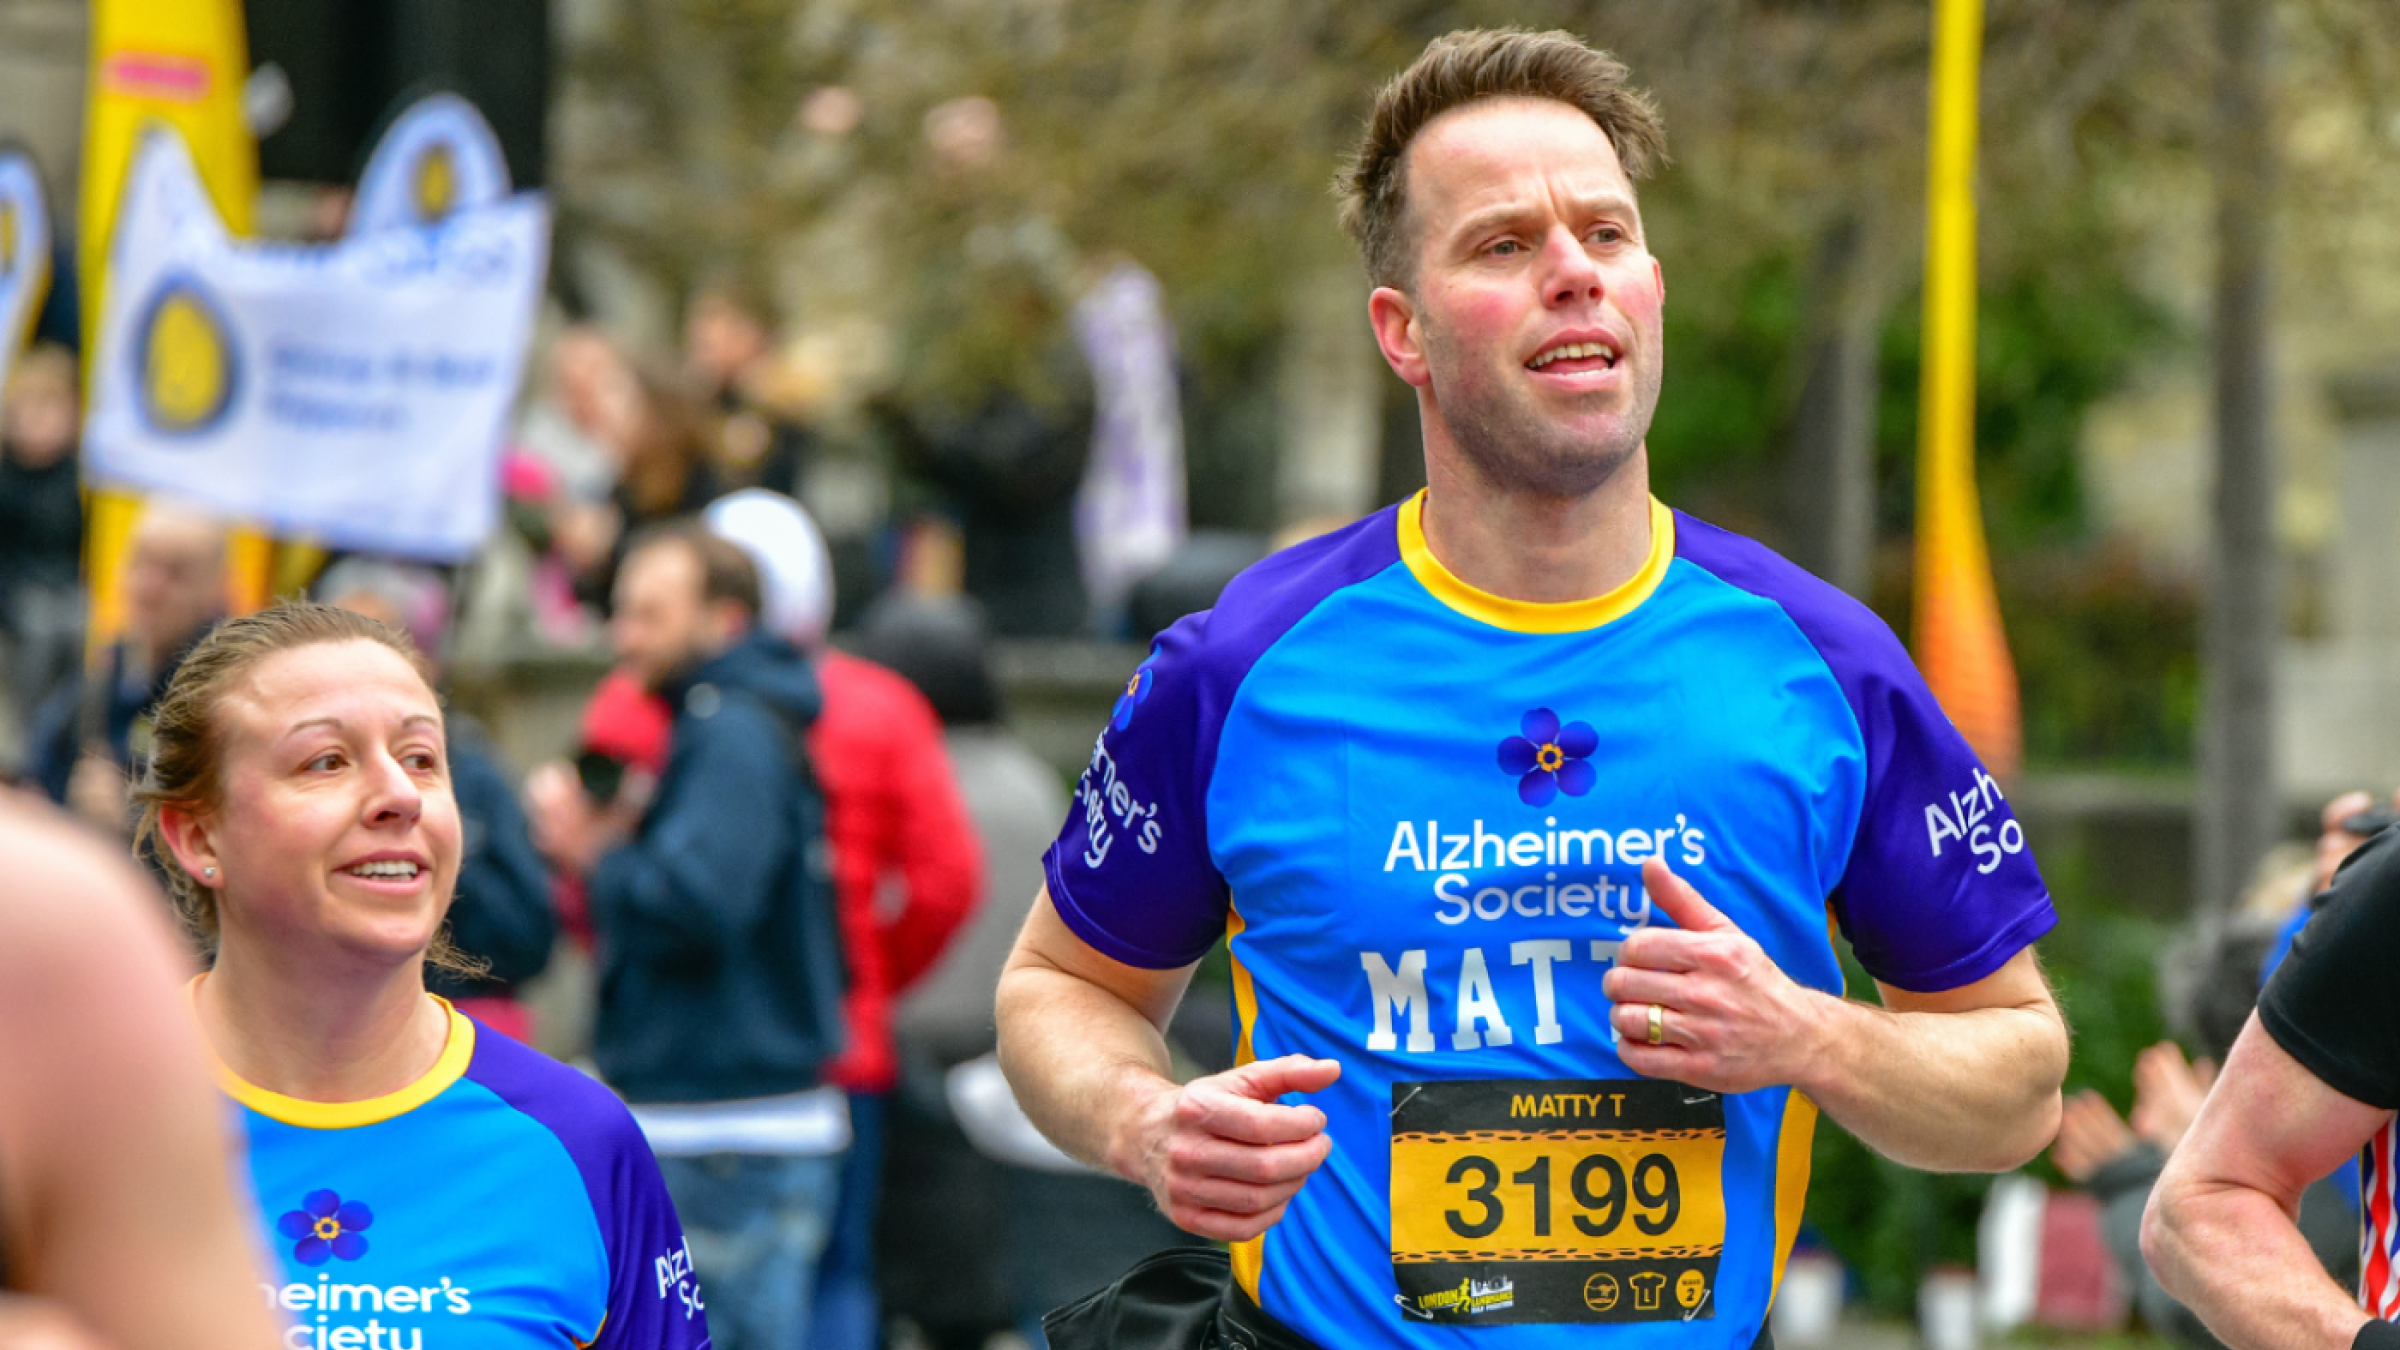 Two Alzheimer's Society runners smiling and running as they pass a crowd